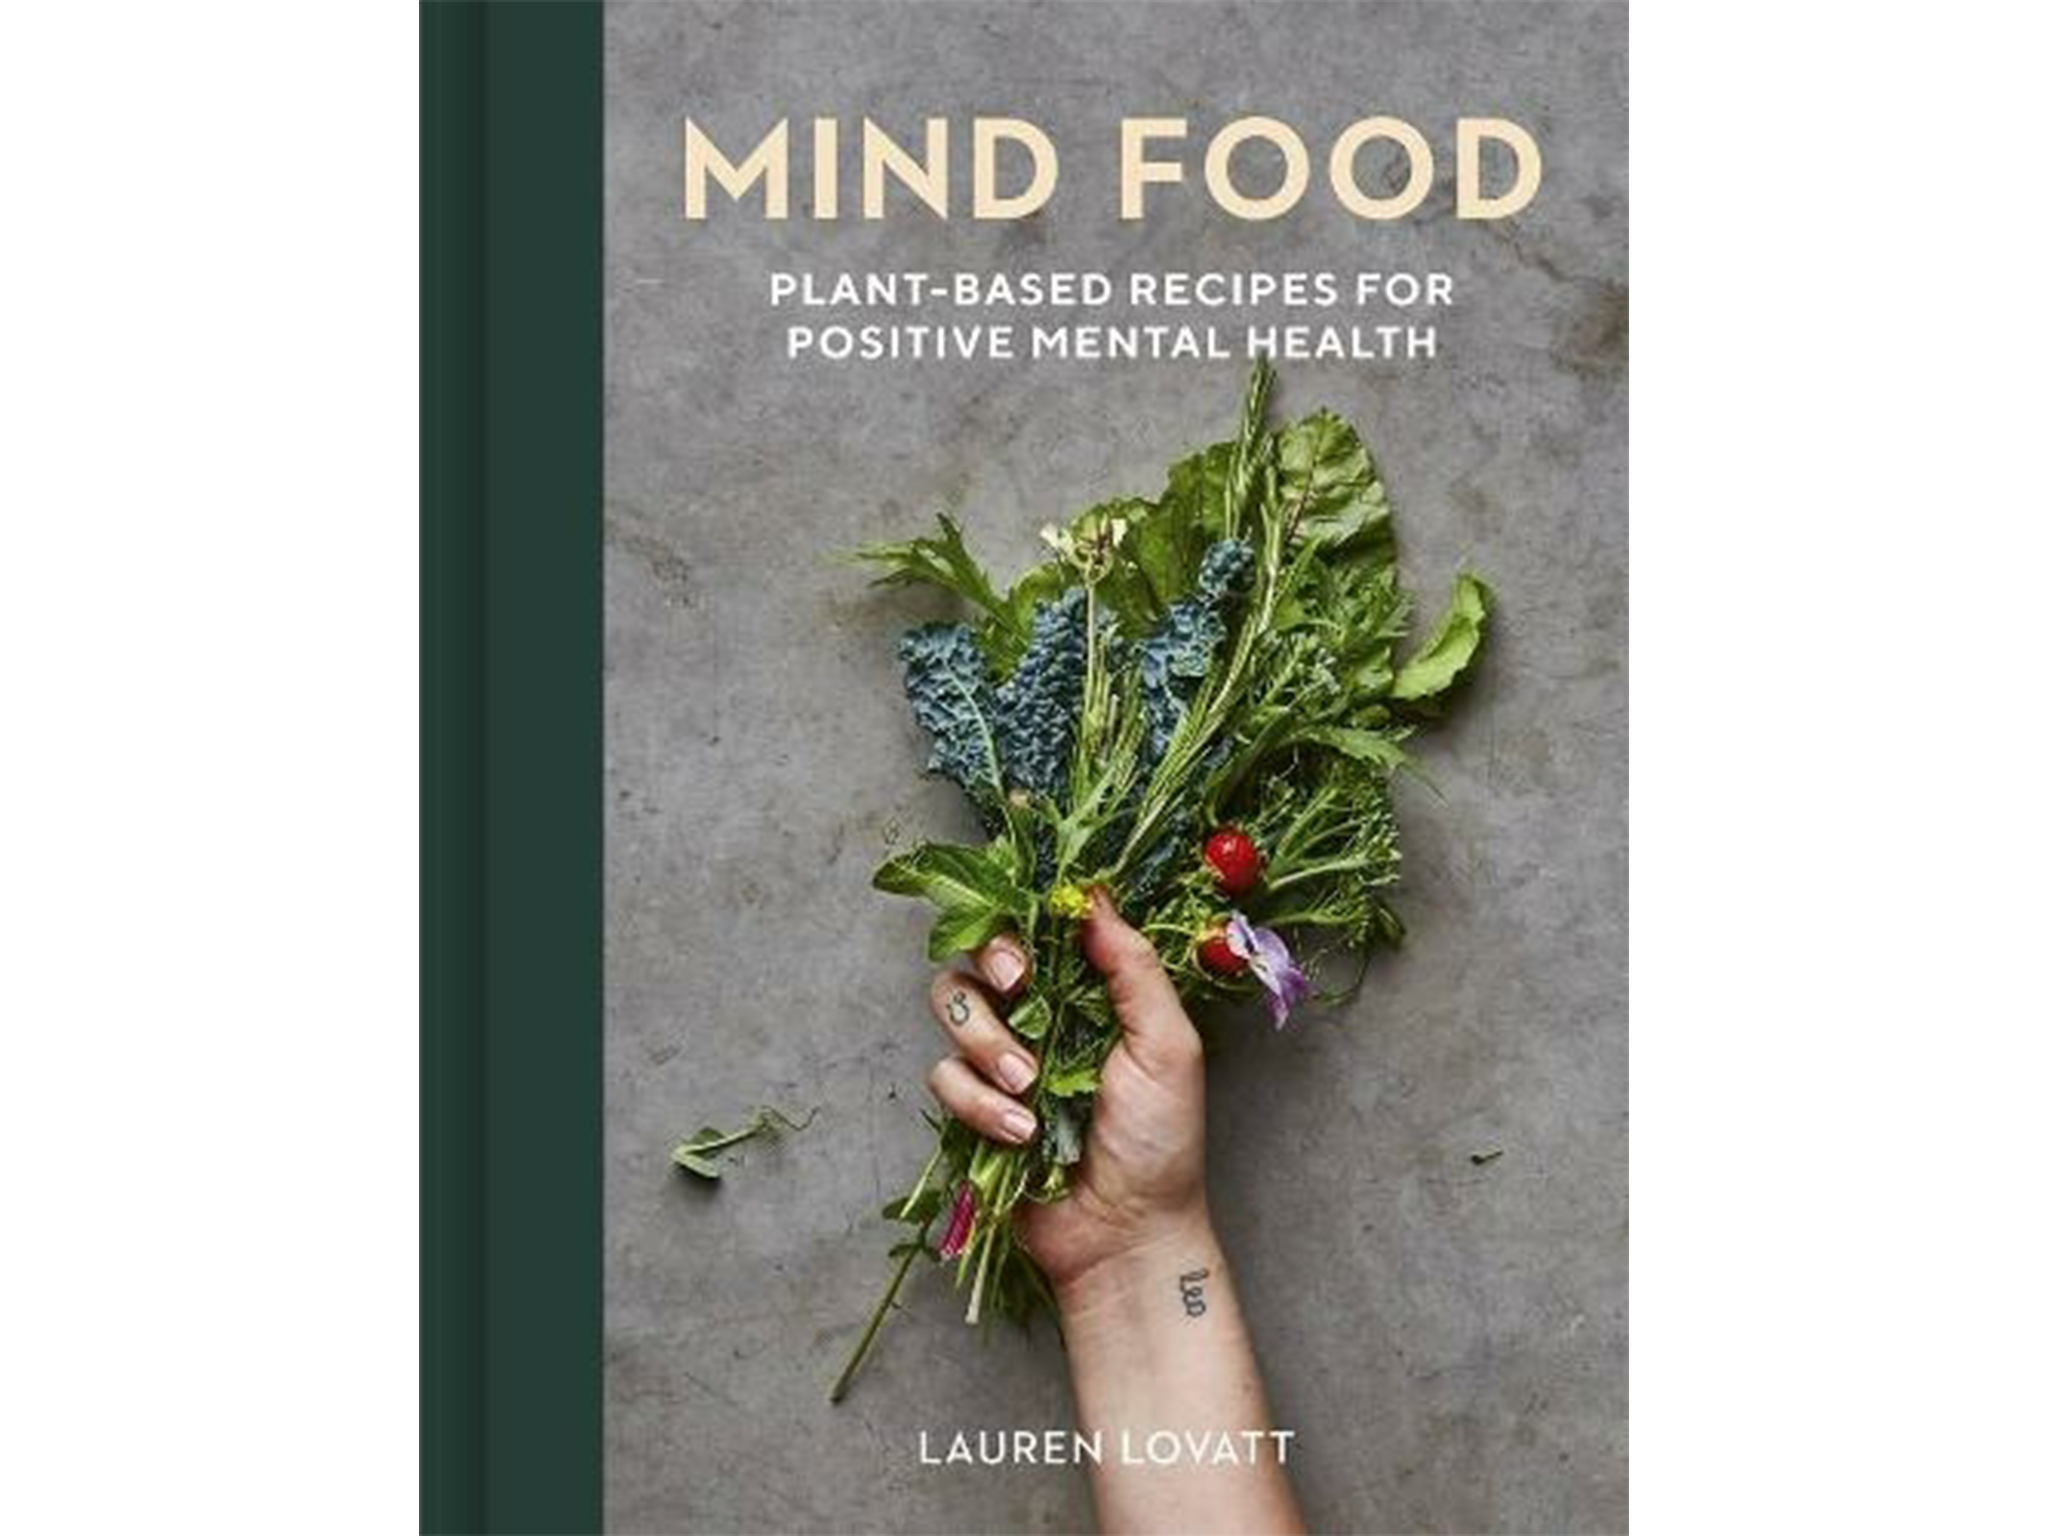 ‘Mind Food’ by Lauren Lovatt, published by Leaping Hare Press